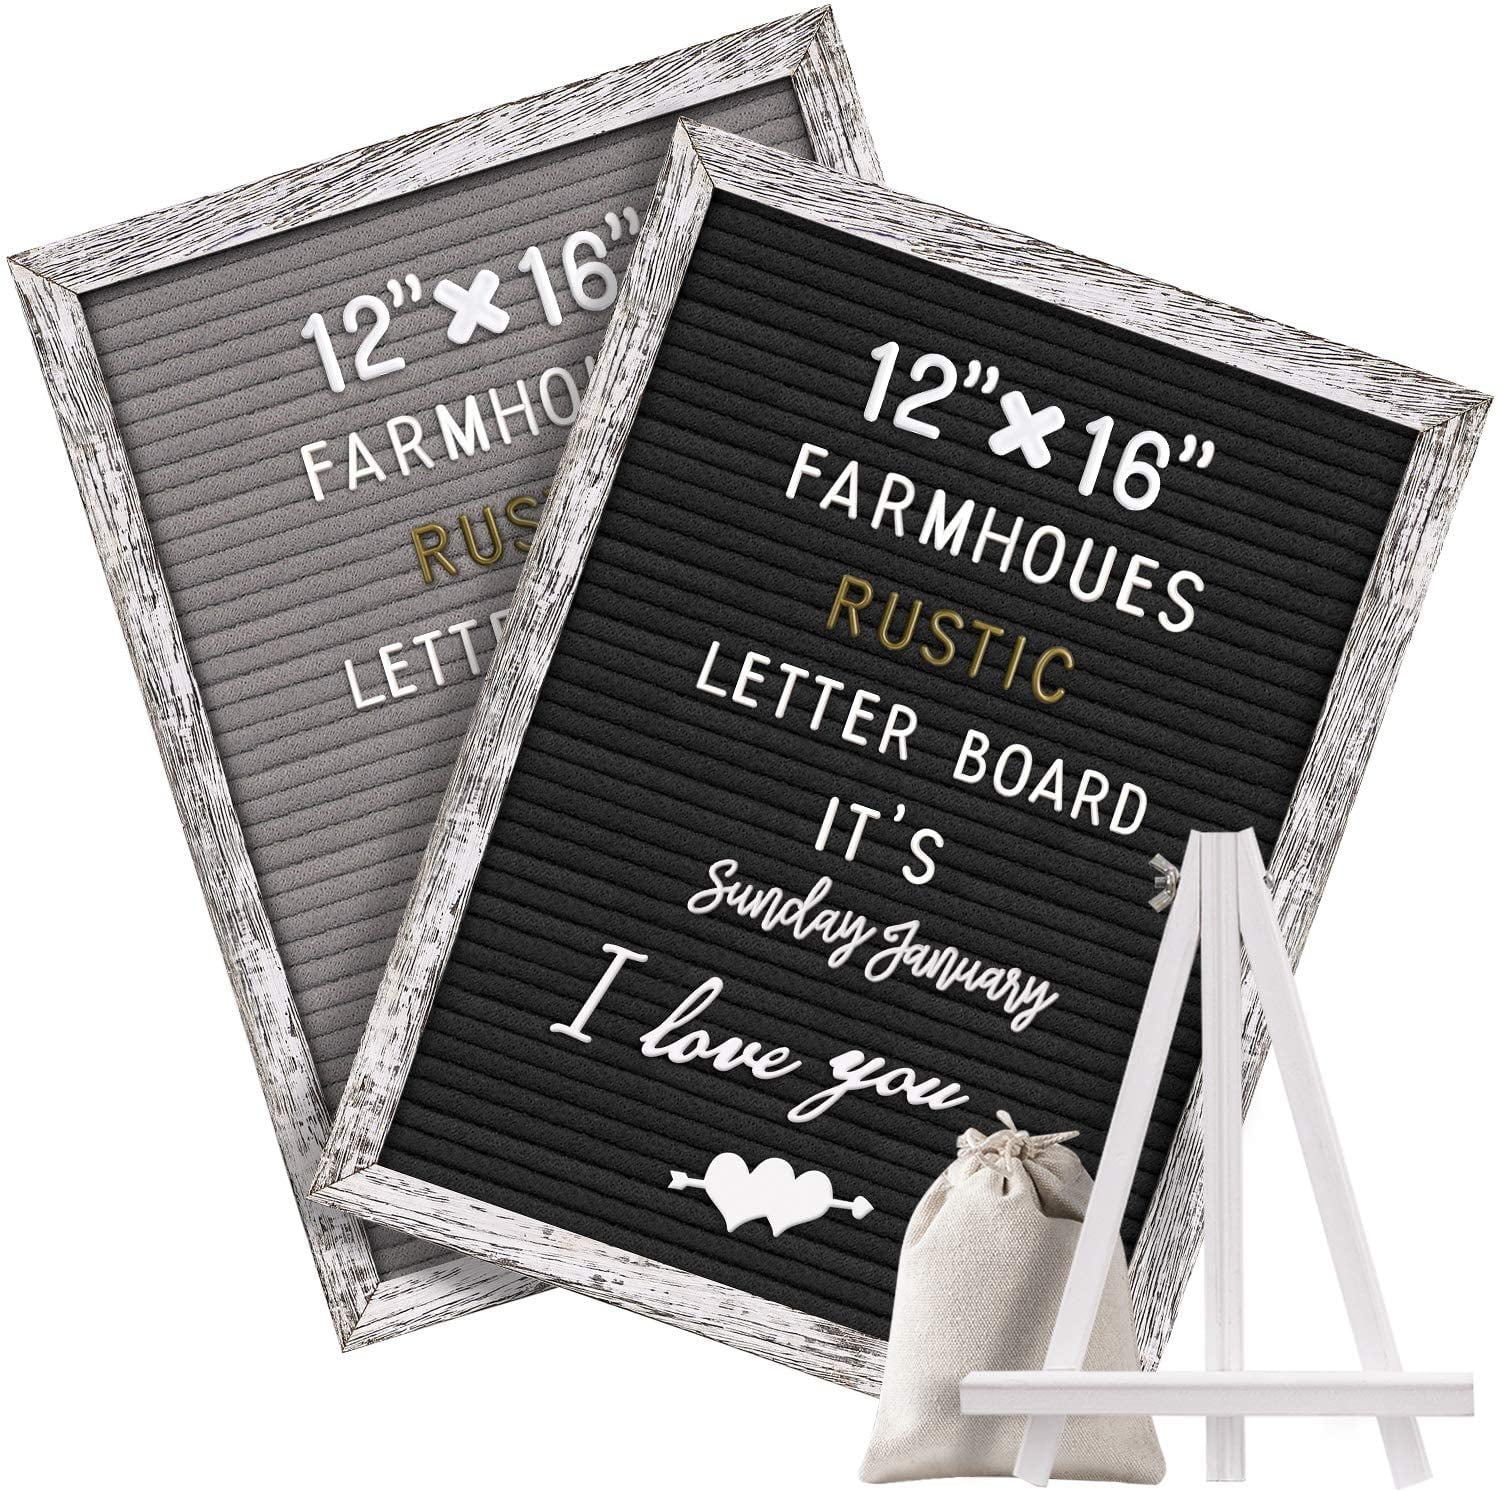 Reclaimed barn wood with white felt letter board and black letters 